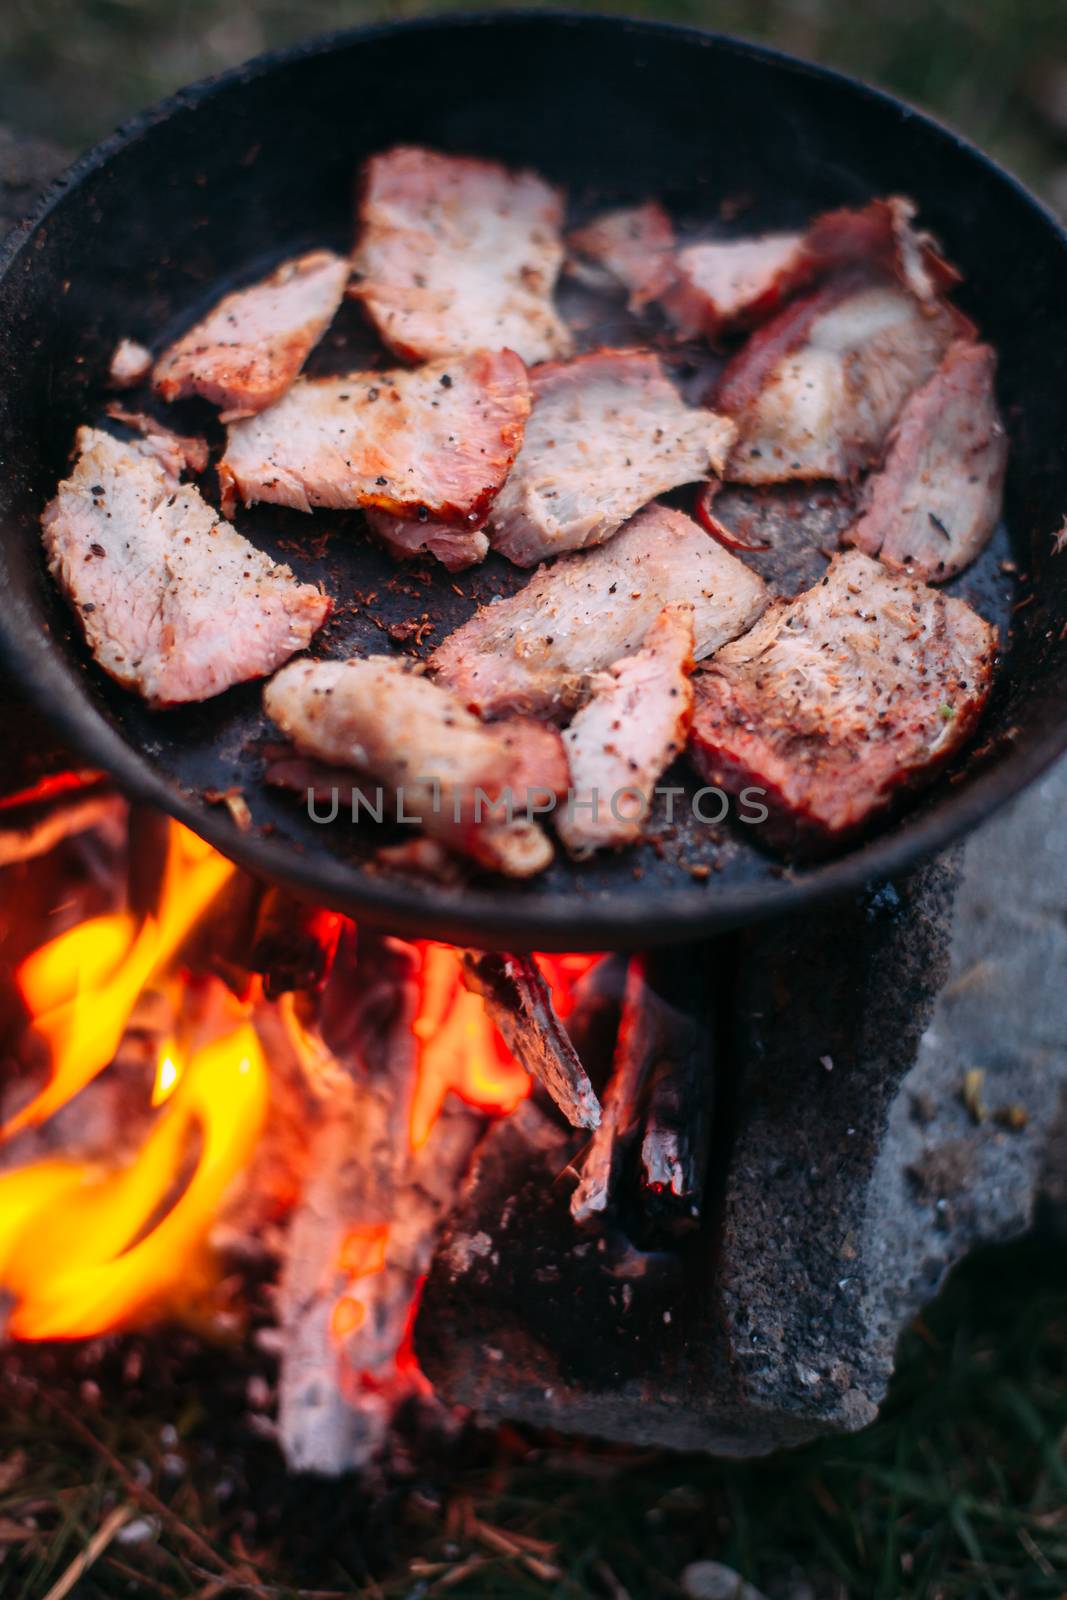 Slices of fried bacon in a pan. Food in a forest camp. Cooking o by Opikanets